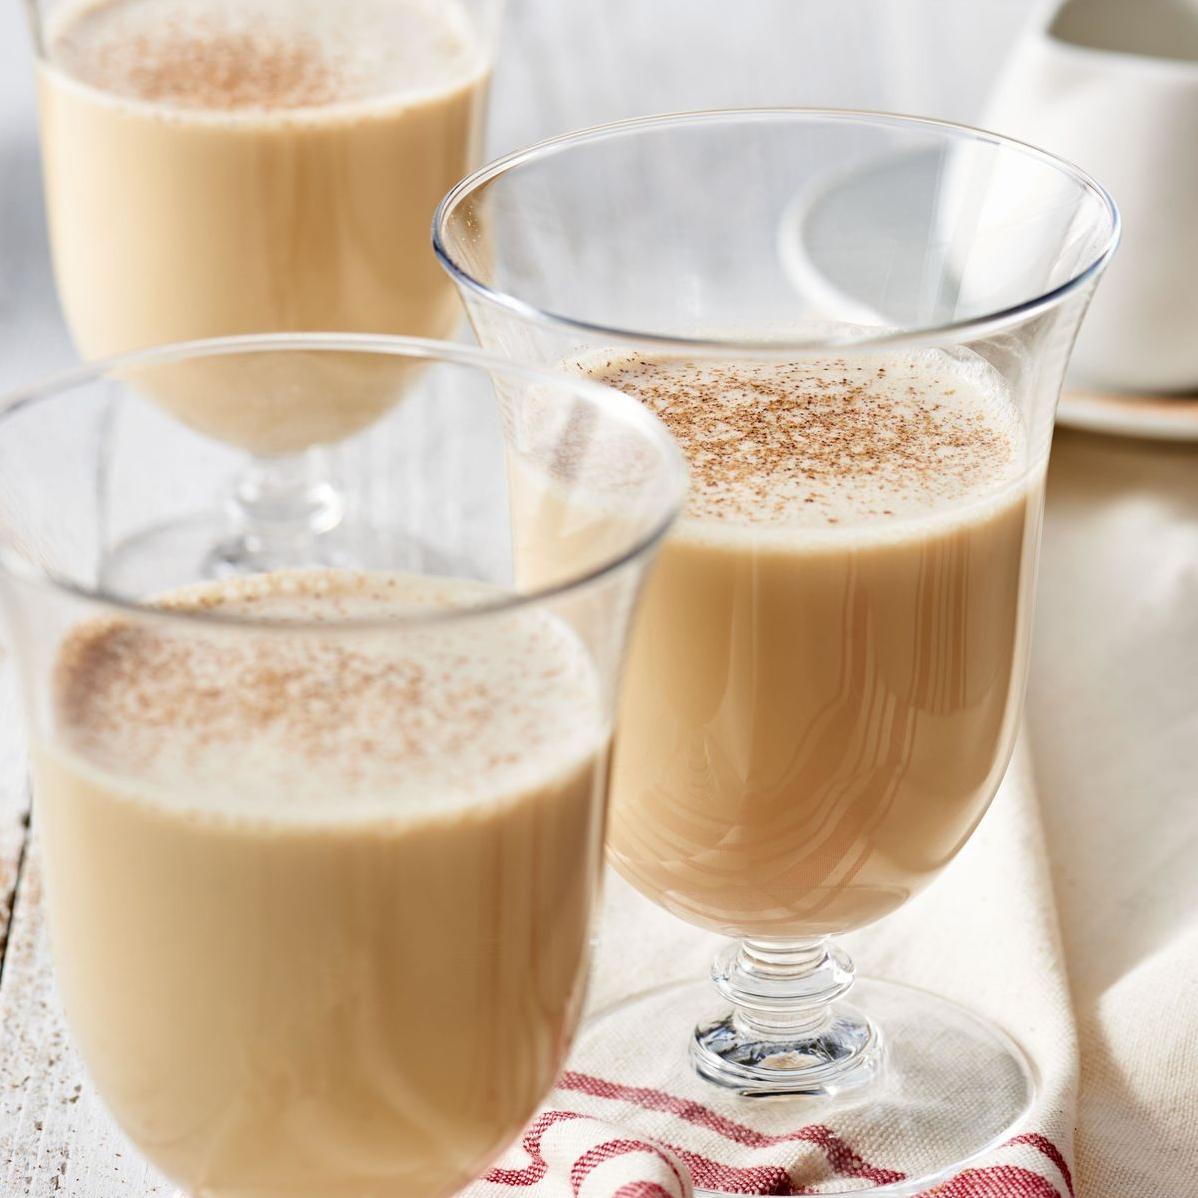  Impress your guests with this unique and flavorful twist on classic eggnog.